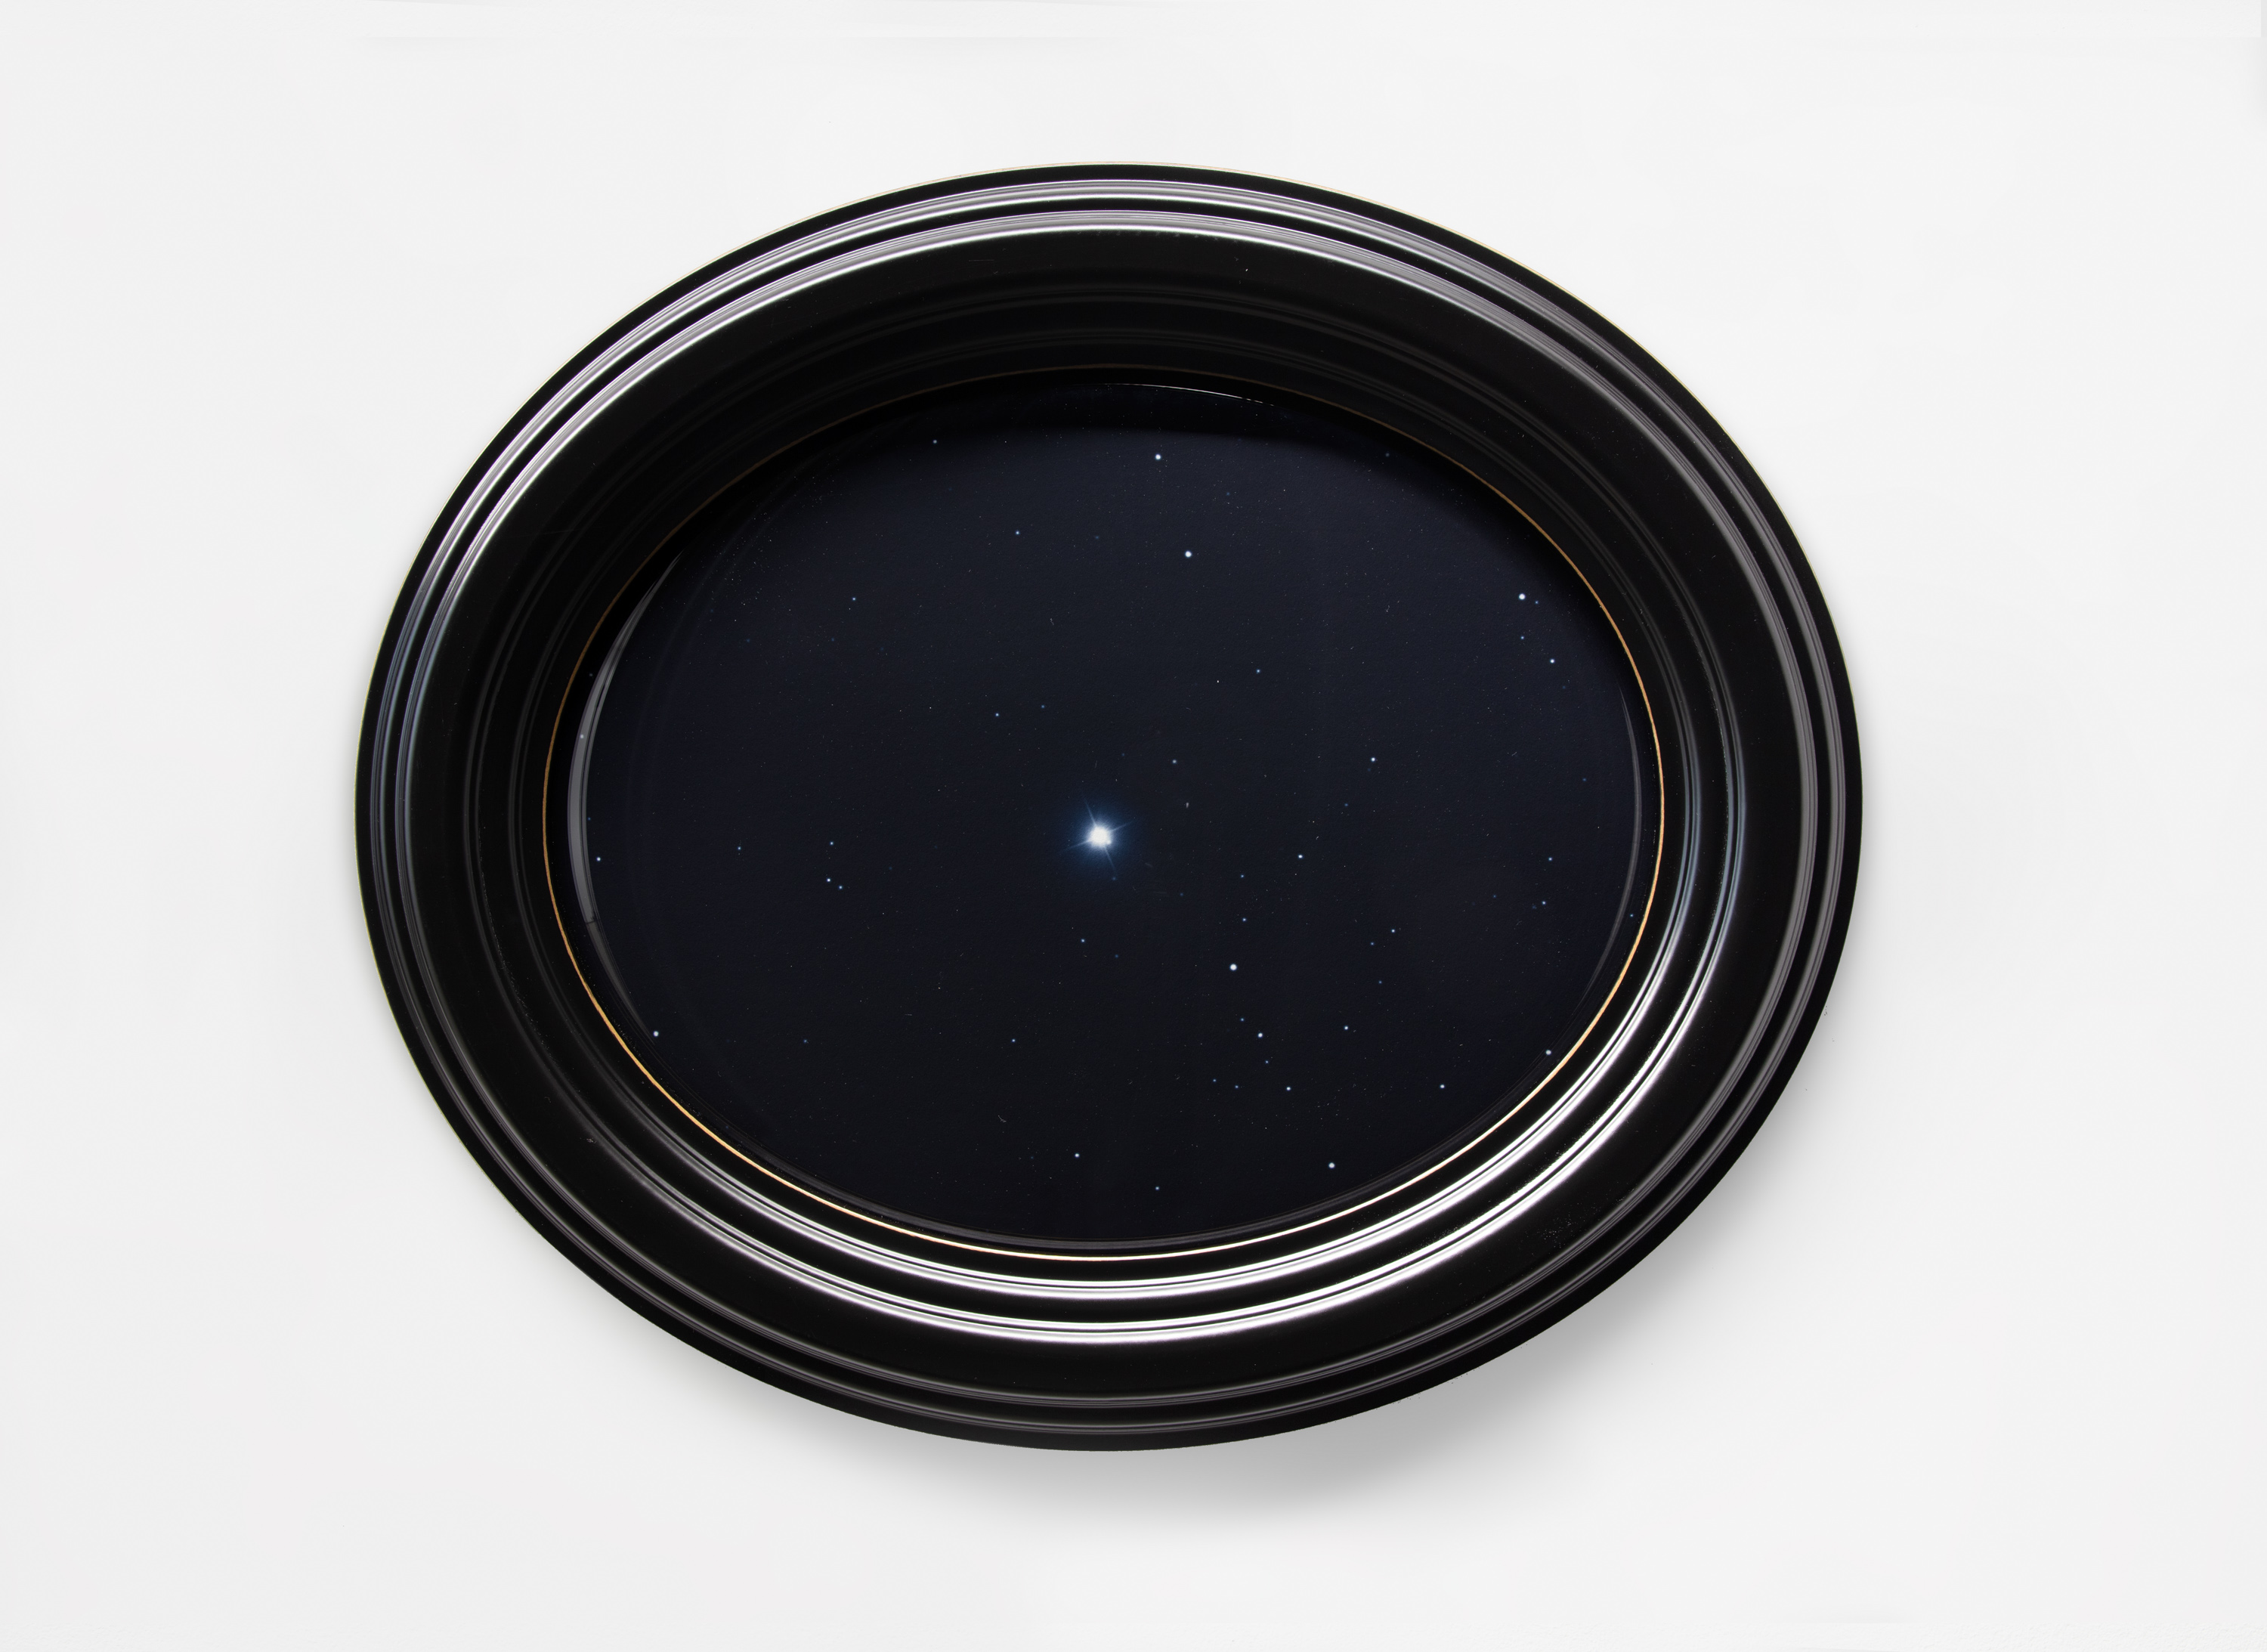 Image of an installed artwork of an oval framed photograph of the night sky, with the North Star in the center.